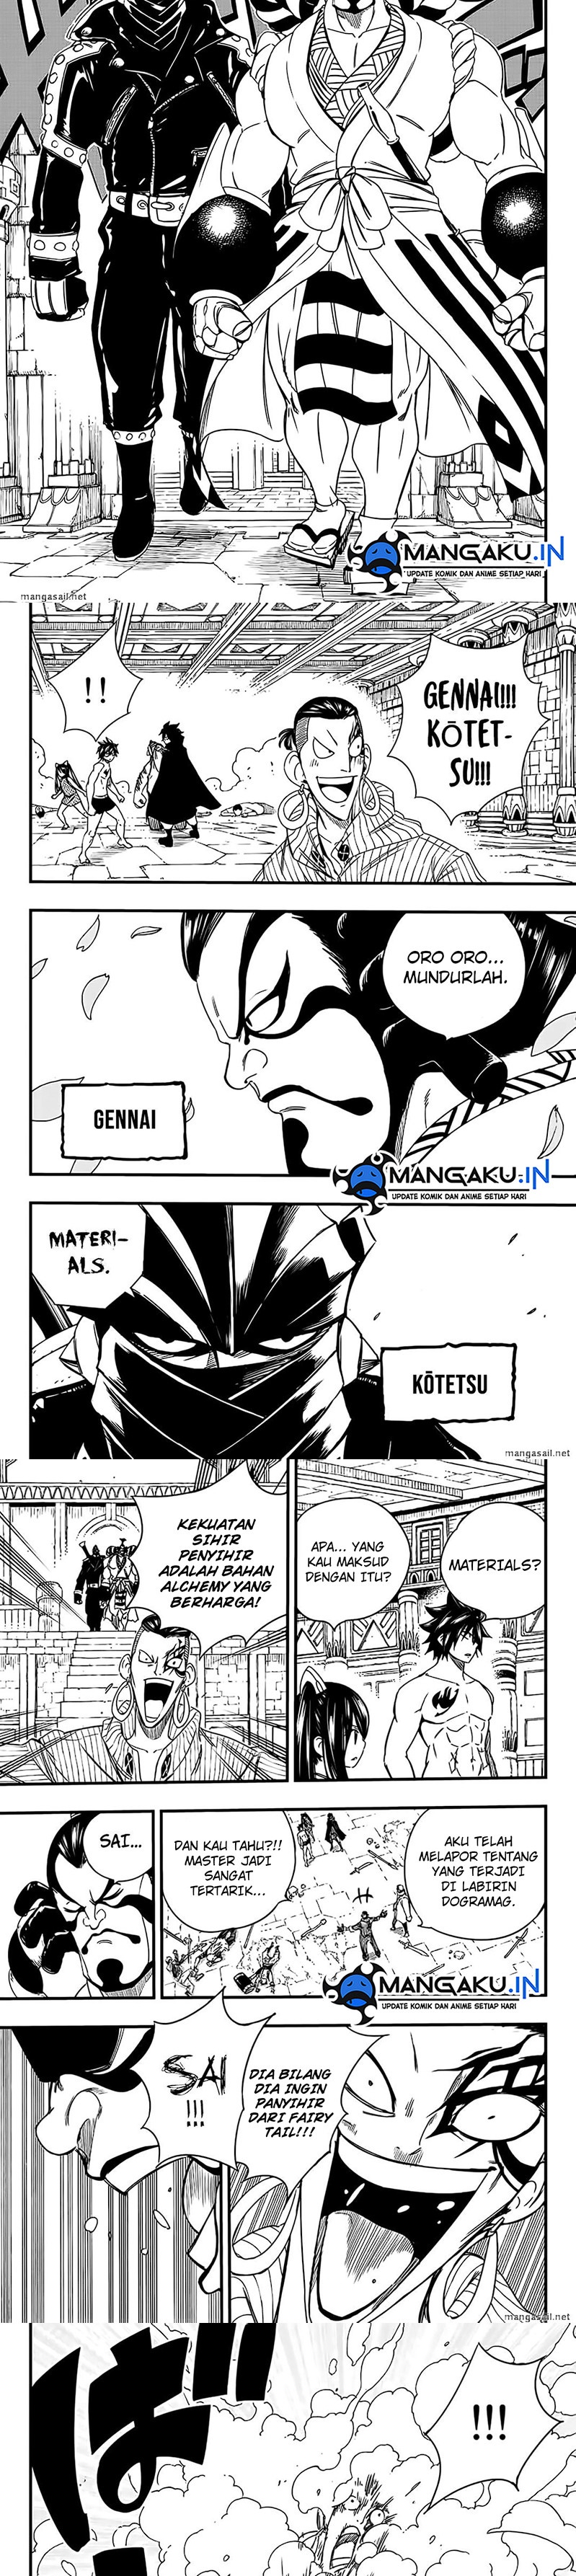 Fairy Tail 100 Years Quest Chapter 129